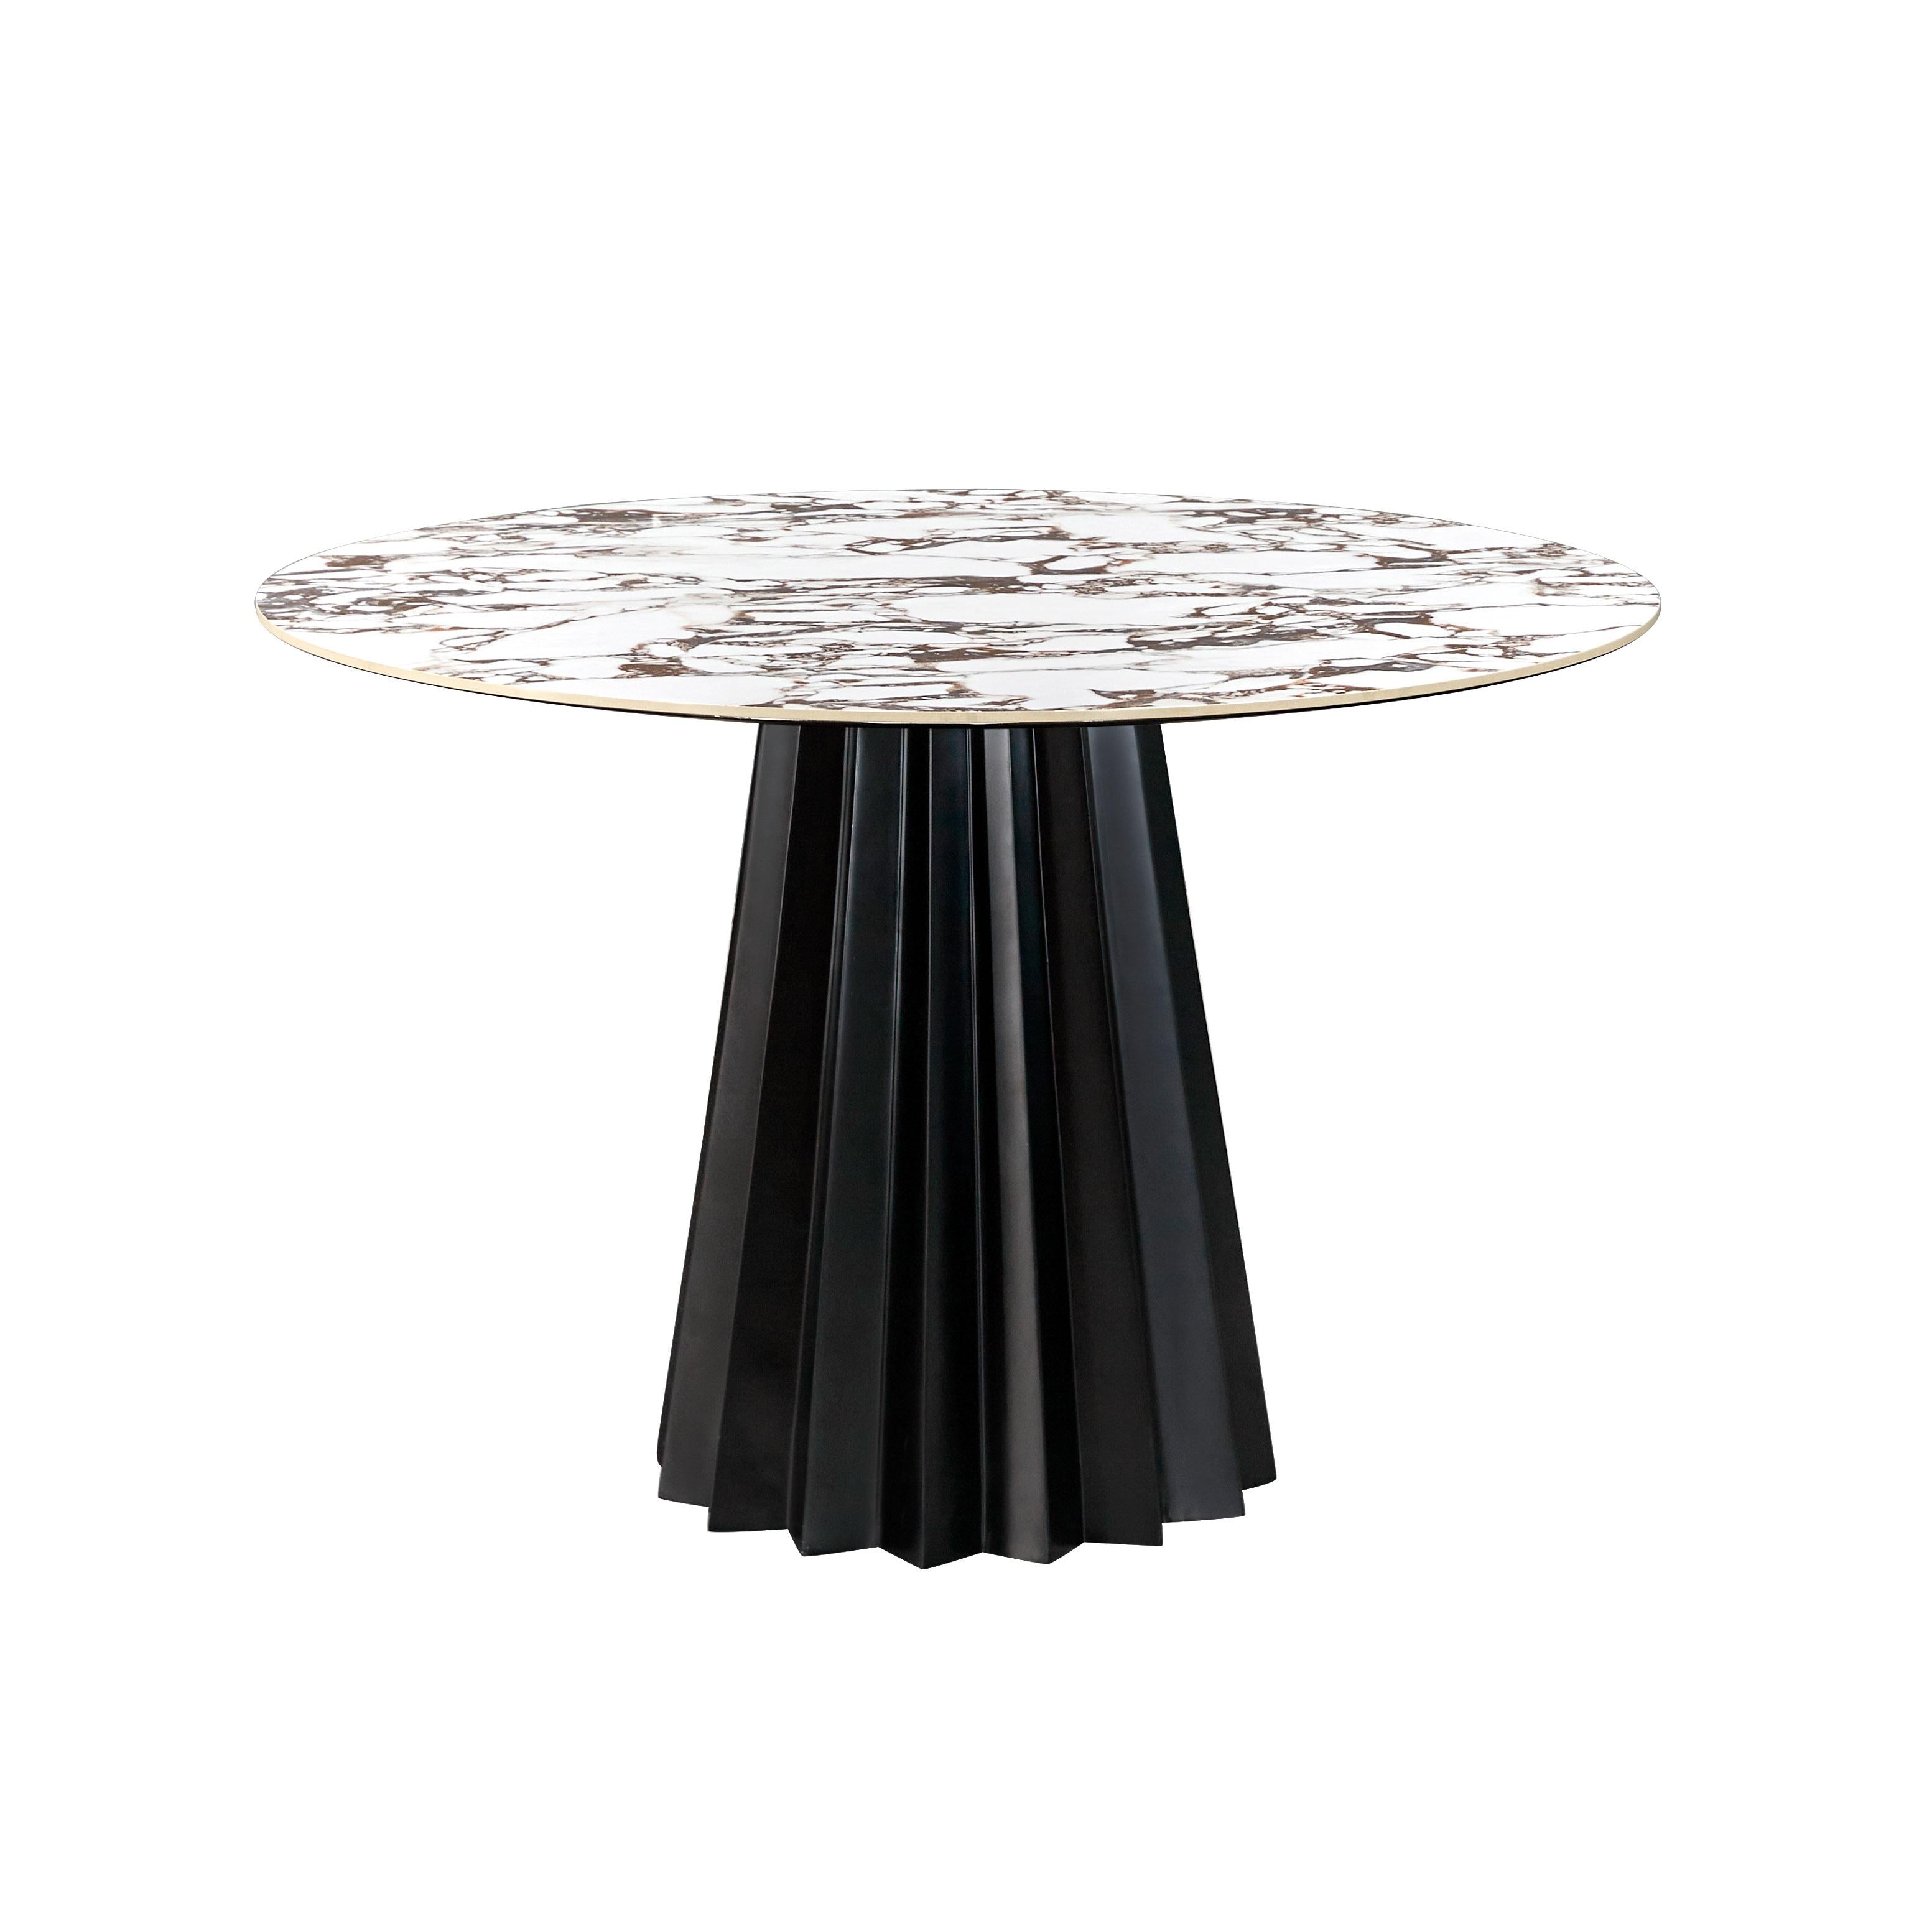 Tov Furniture Dining Tables - Jimena Marble Ceramic 47" Round Dining Table